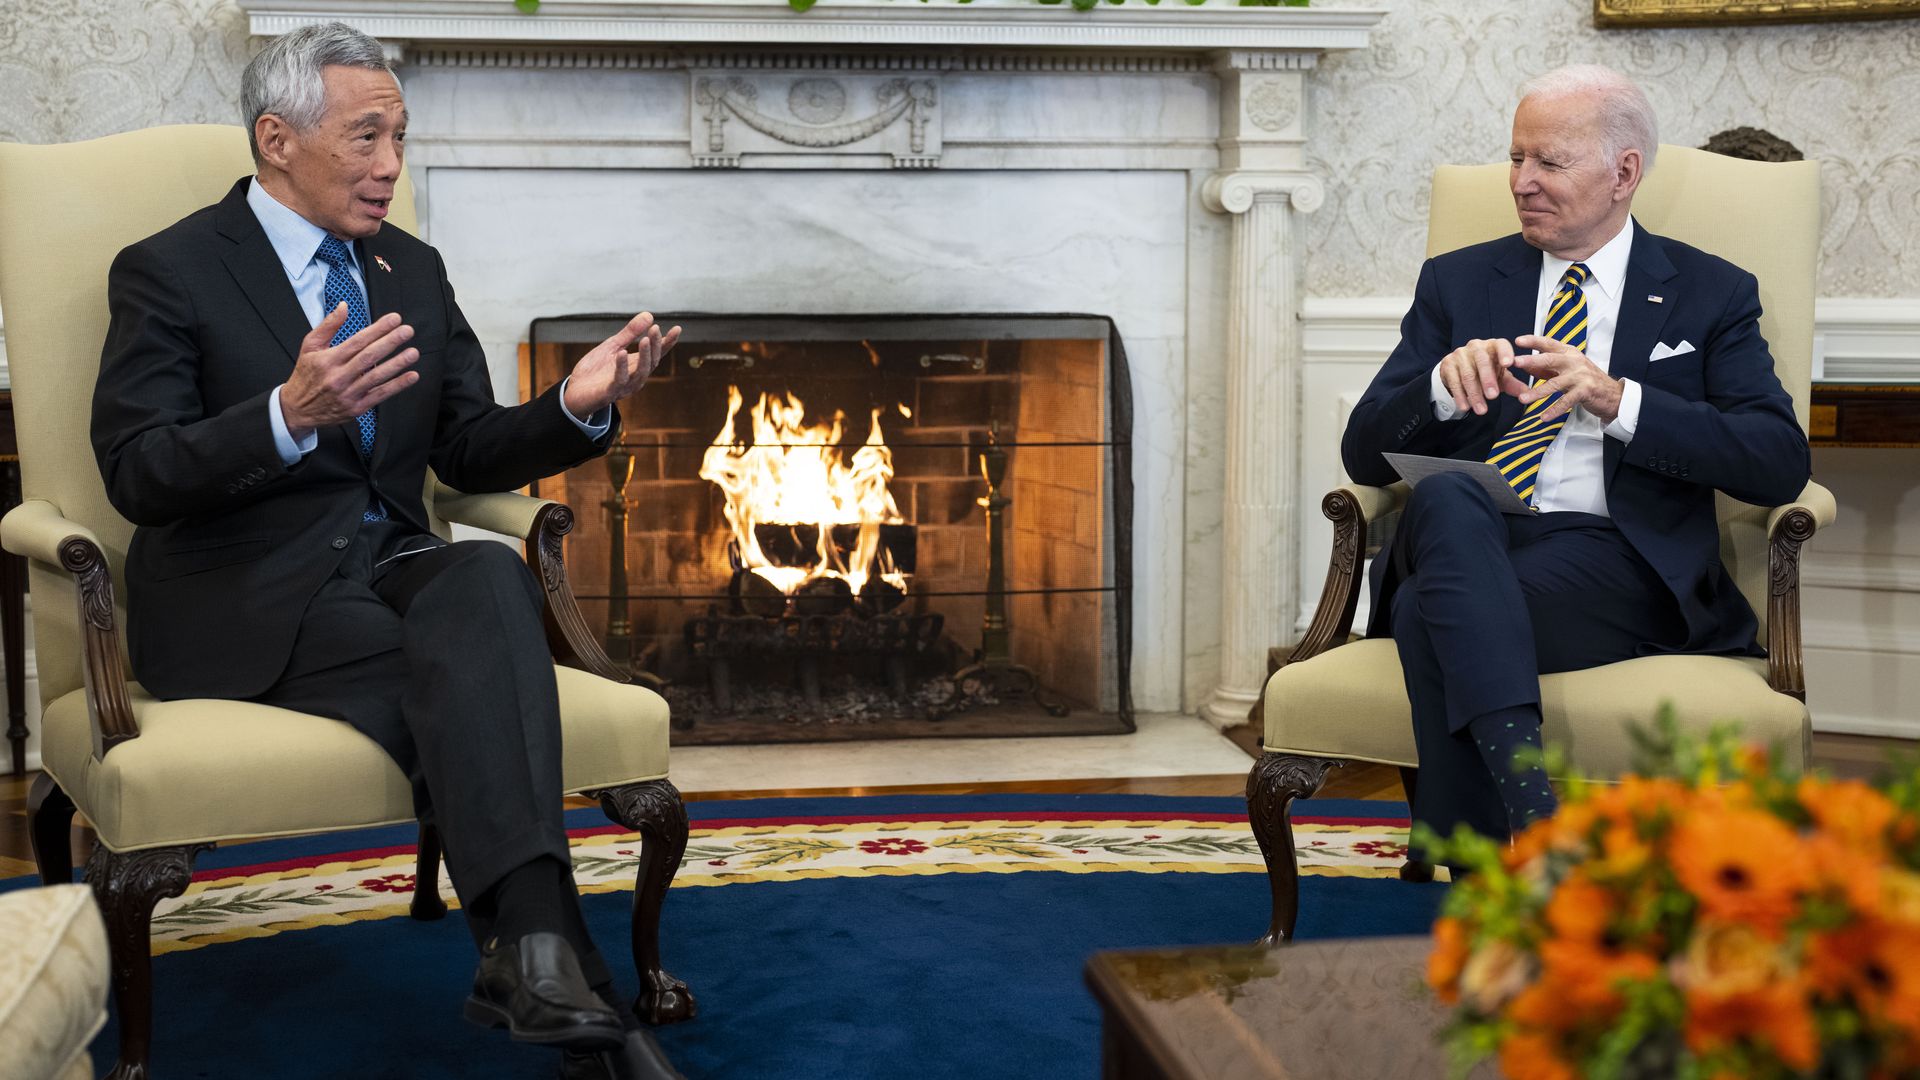 Sinapore's prime minister is seen sitting with President Biden in the Oval Office.